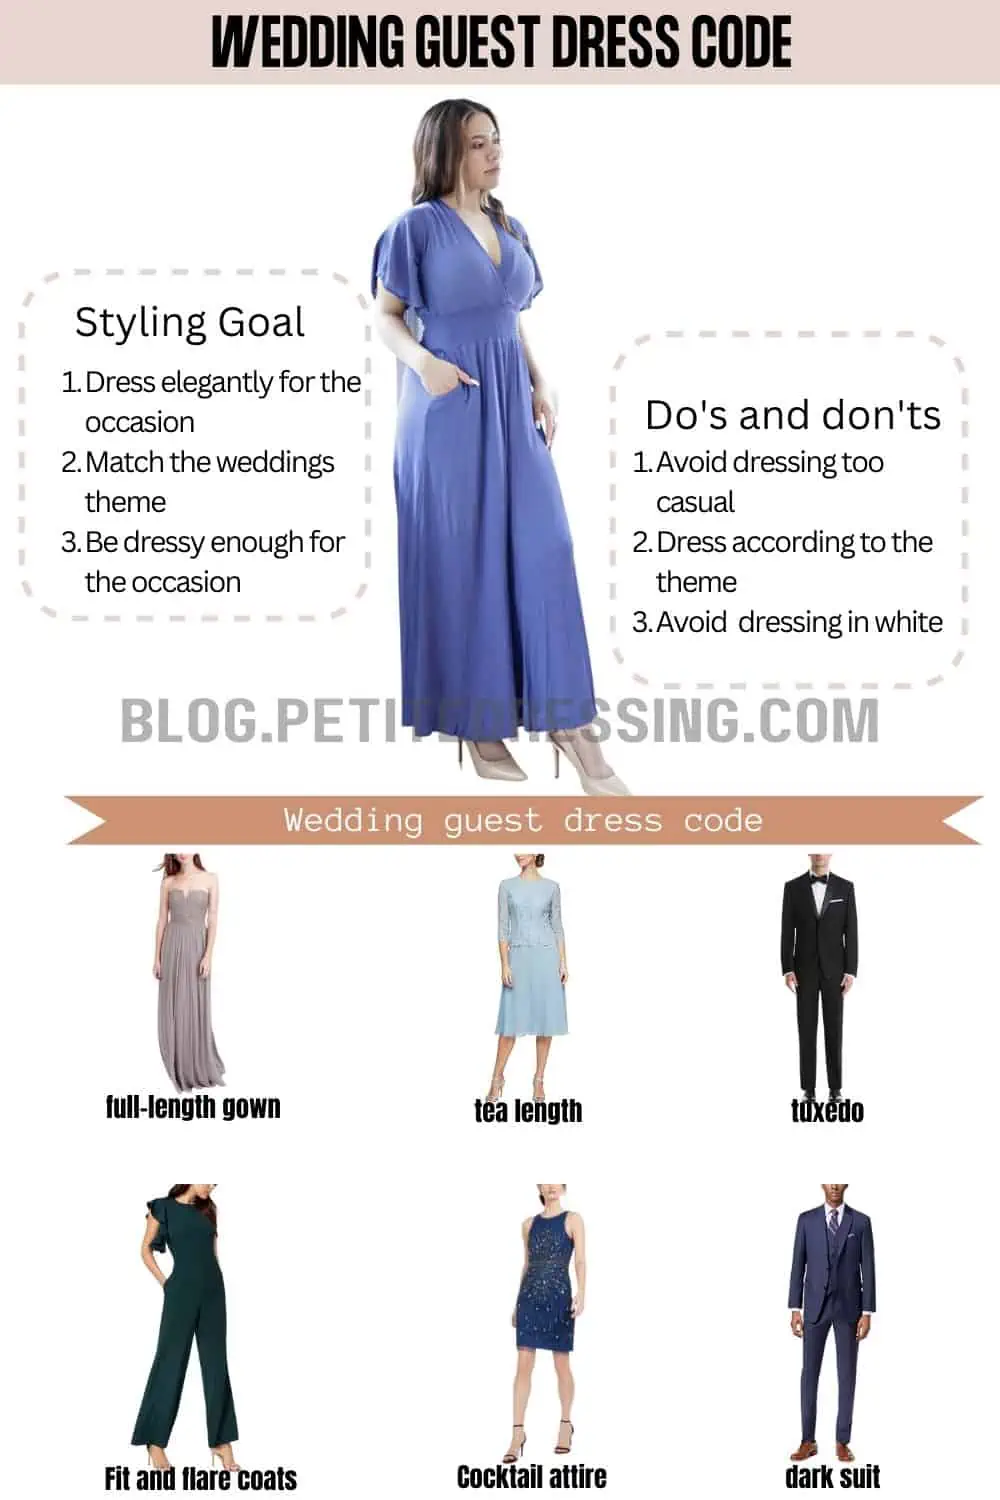 Cocktail Dress Code for a Wedding